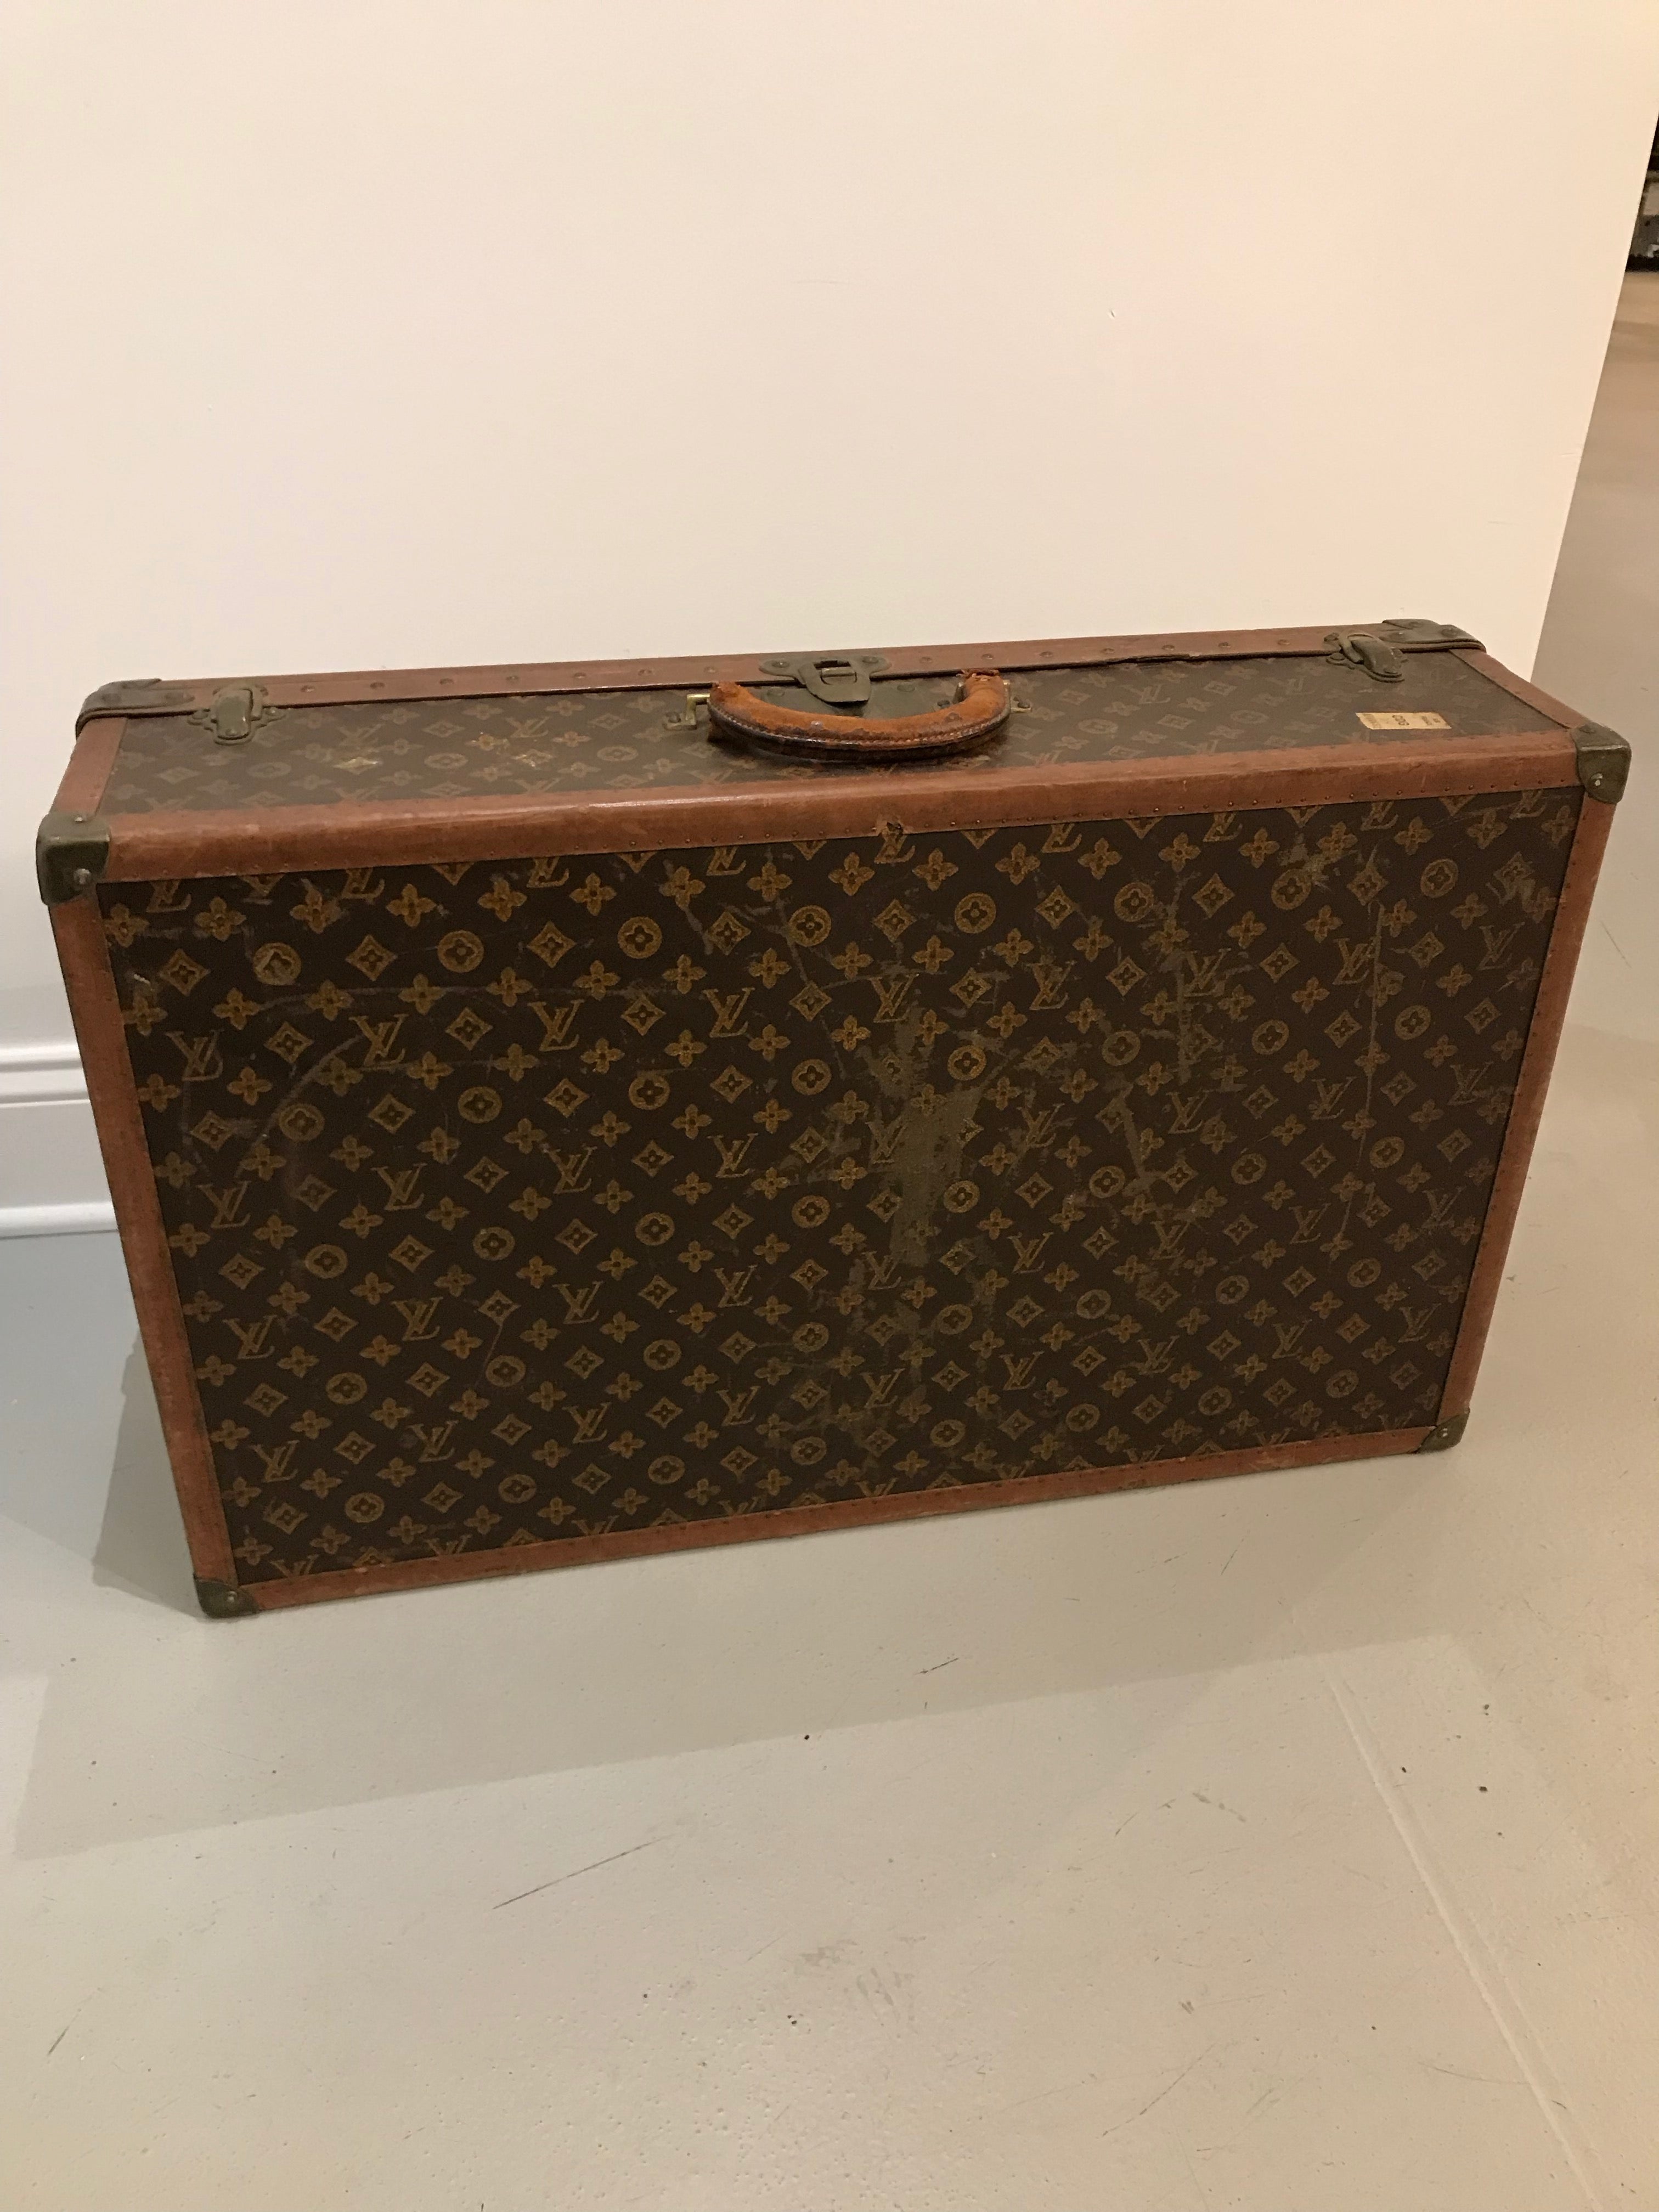 Louis Vuitton Vanity Trunk - For Sale on 1stDibs